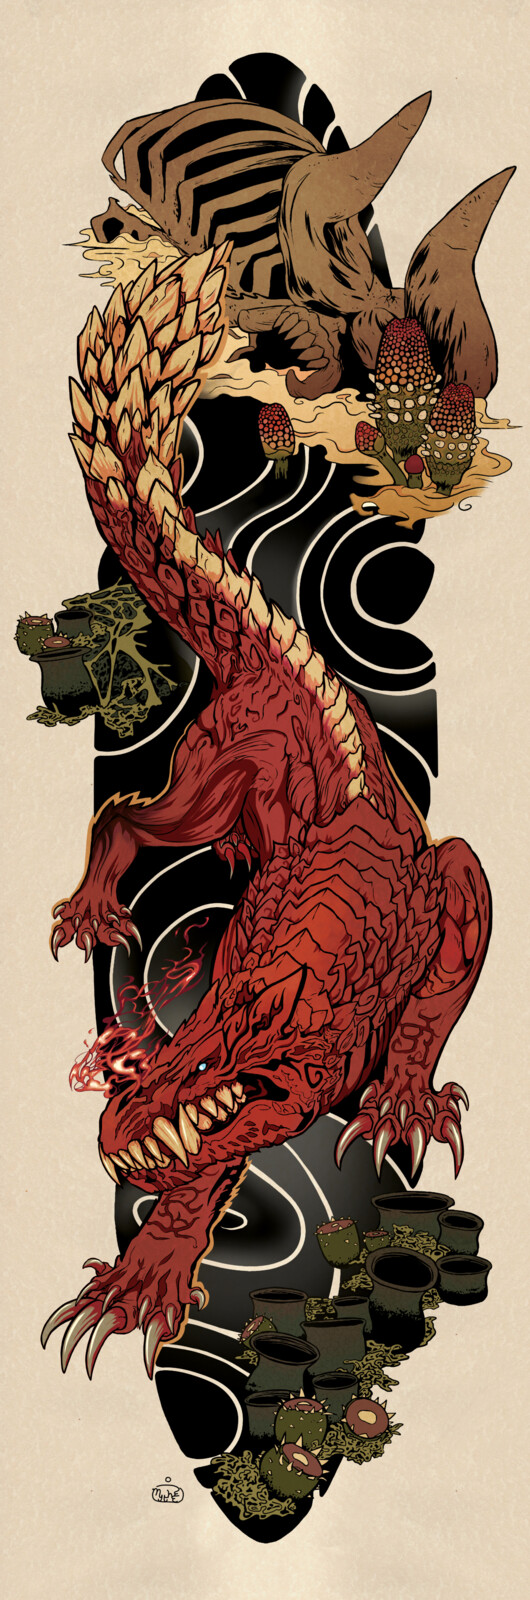 A tattoo design inspired by japanese sleeve tattoos and Odogaron, a monster from Capcom's Monster Hunter franchise